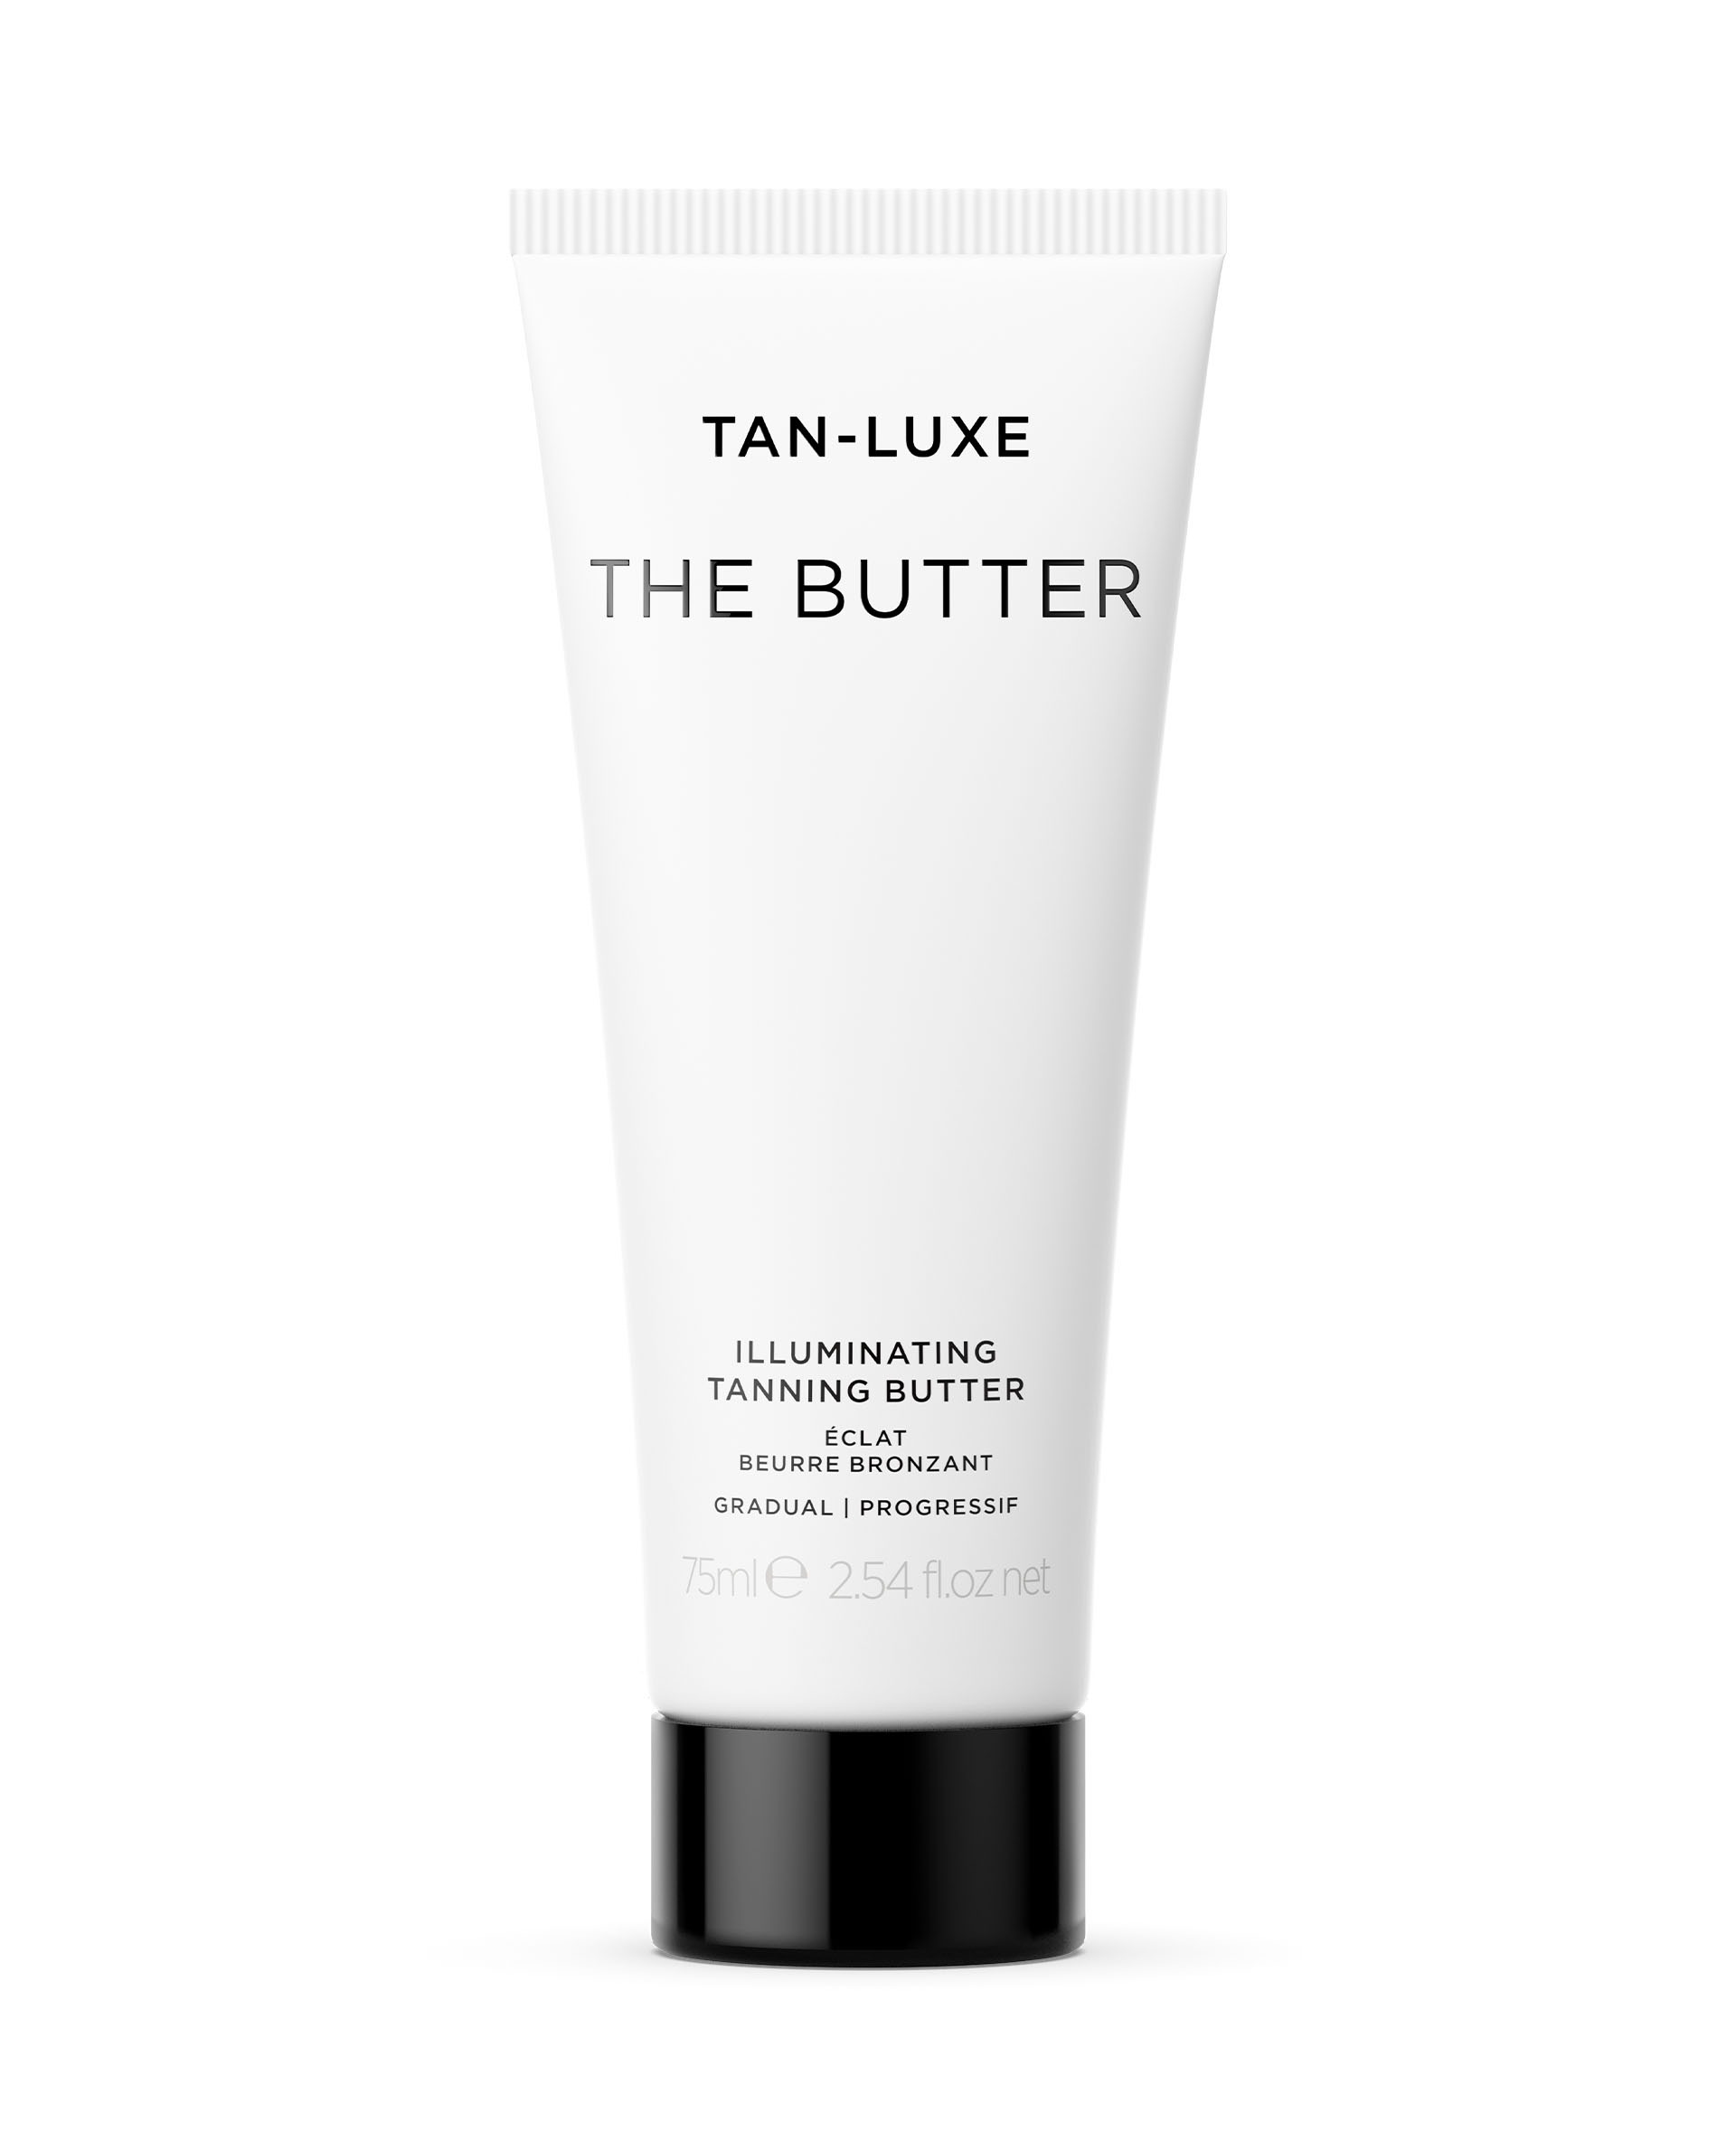 _0003_TanLuxe The Butter 75ml Render